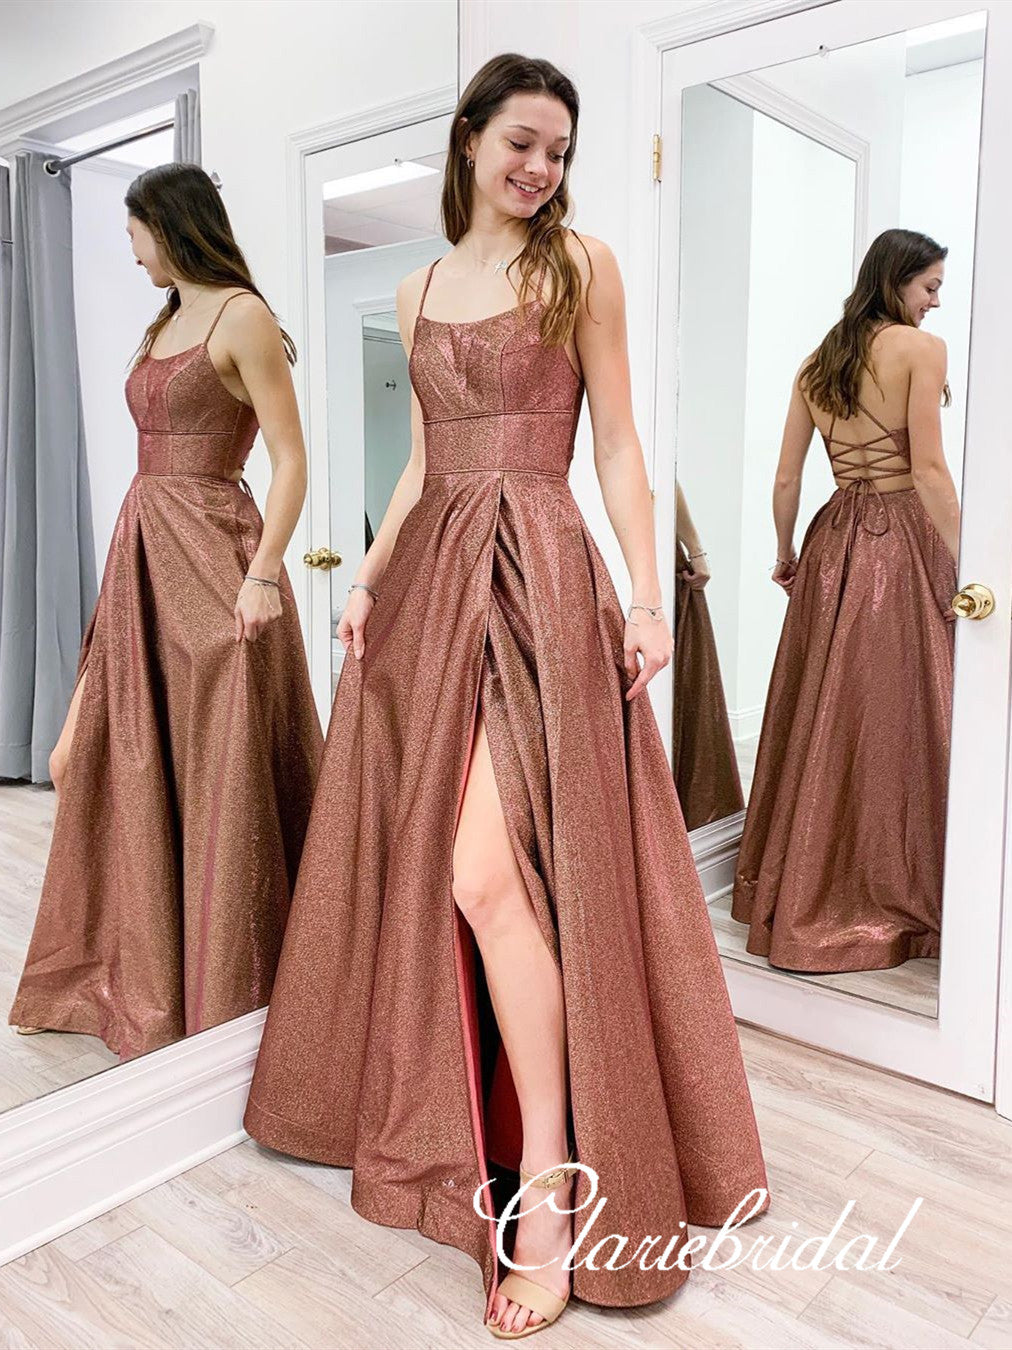 Straps Lace Up Shemmering Fabric Long Prom Dresses, 2020 Prom Dresses, Cheap Prom Dresses, Popular Prom Dresses